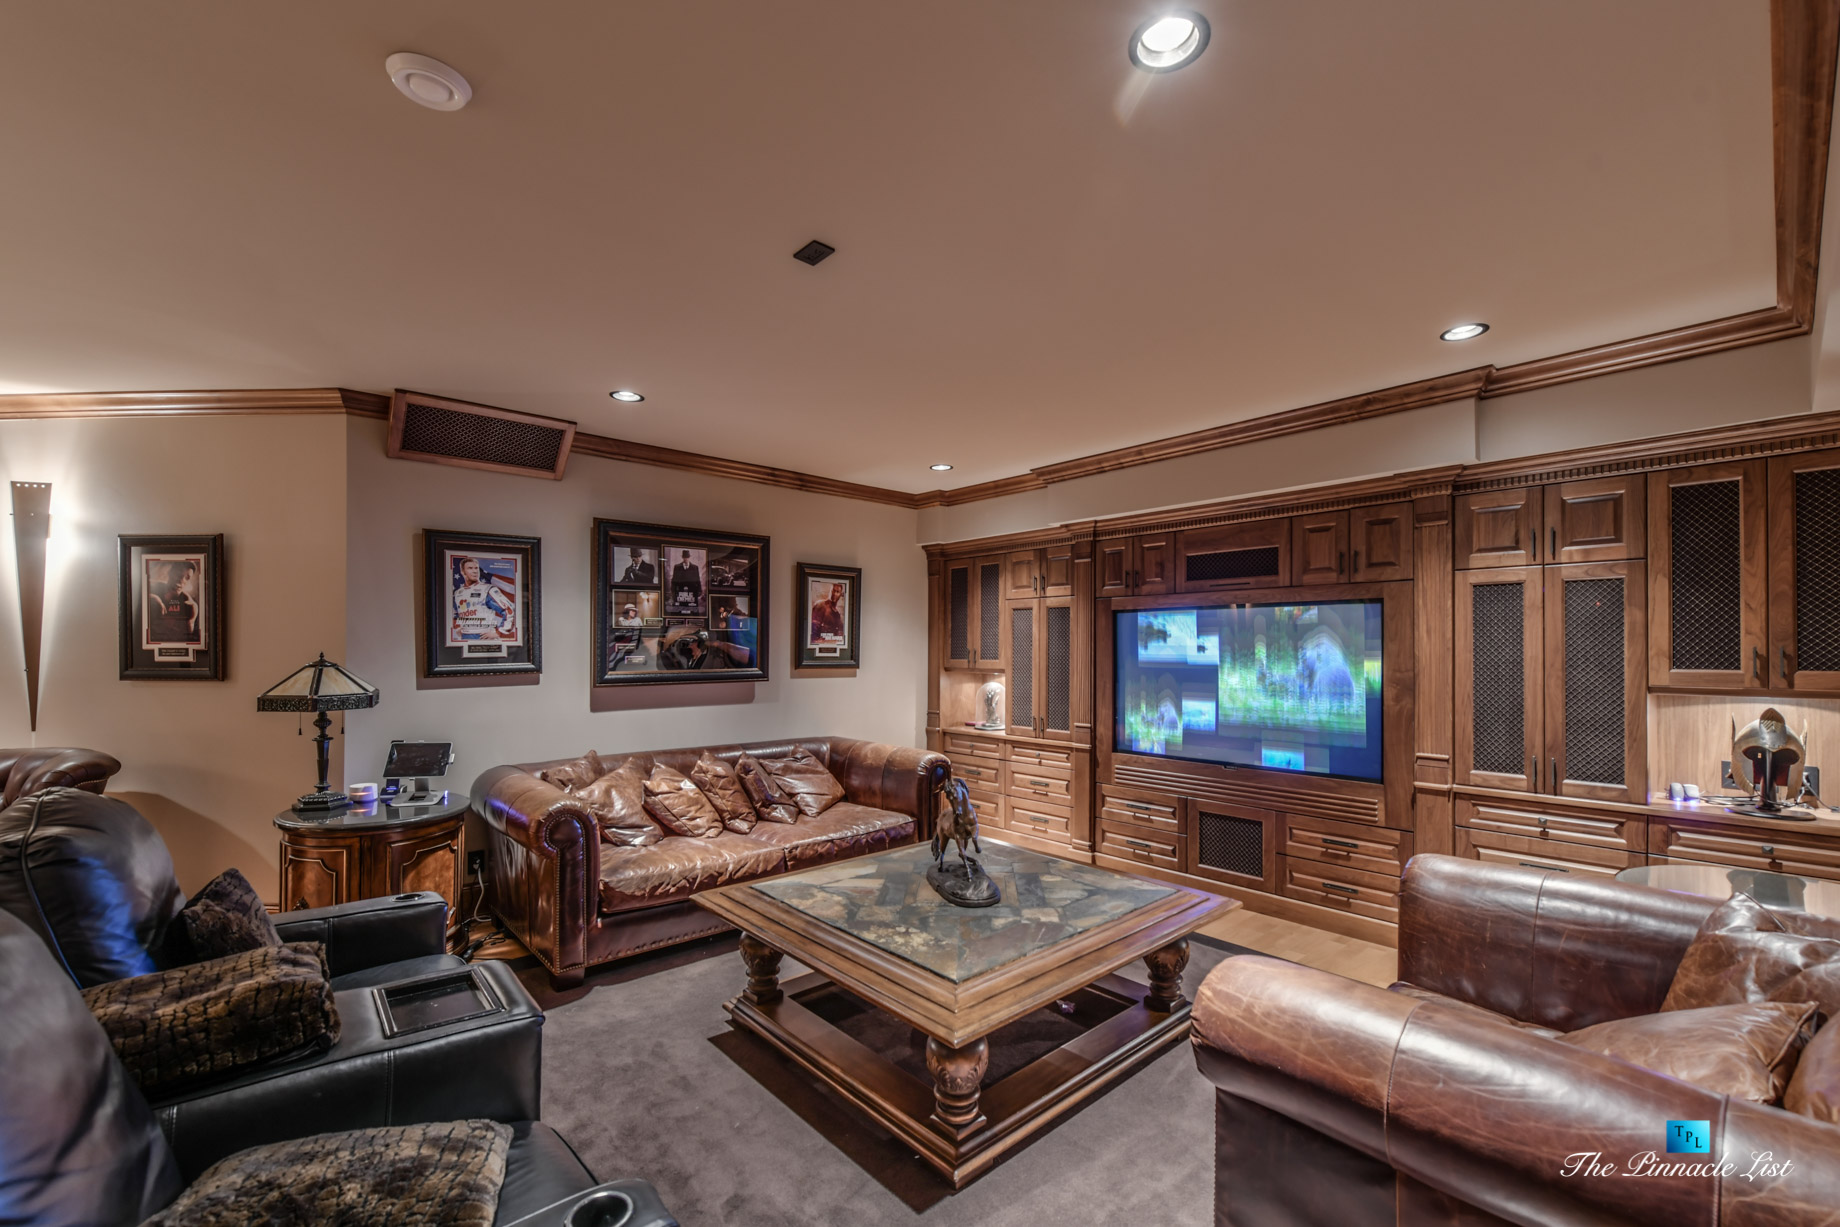 3053 Anmore Creek Way, Anmore, BC, Canada – Basement Man Cave Theatre – Luxury Real Estate – Greater Vancouver Home